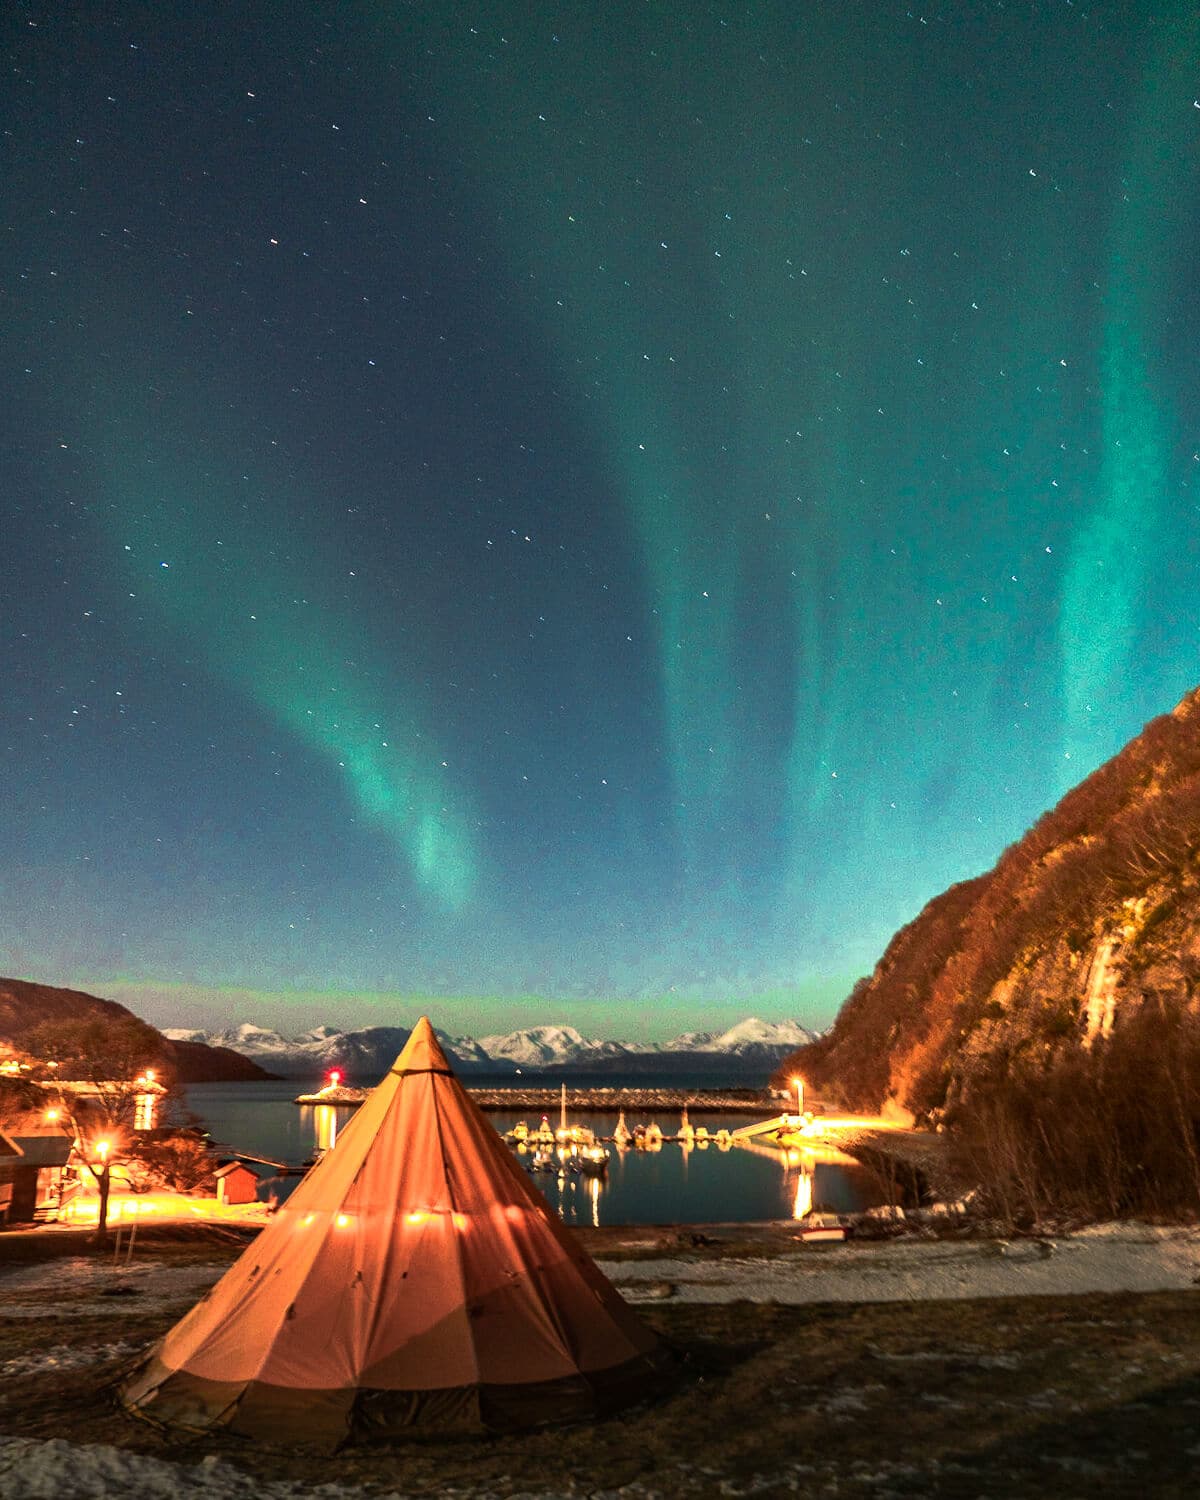 The Absolute Best Time to See Northern Lights in Norway + Helpful Tips